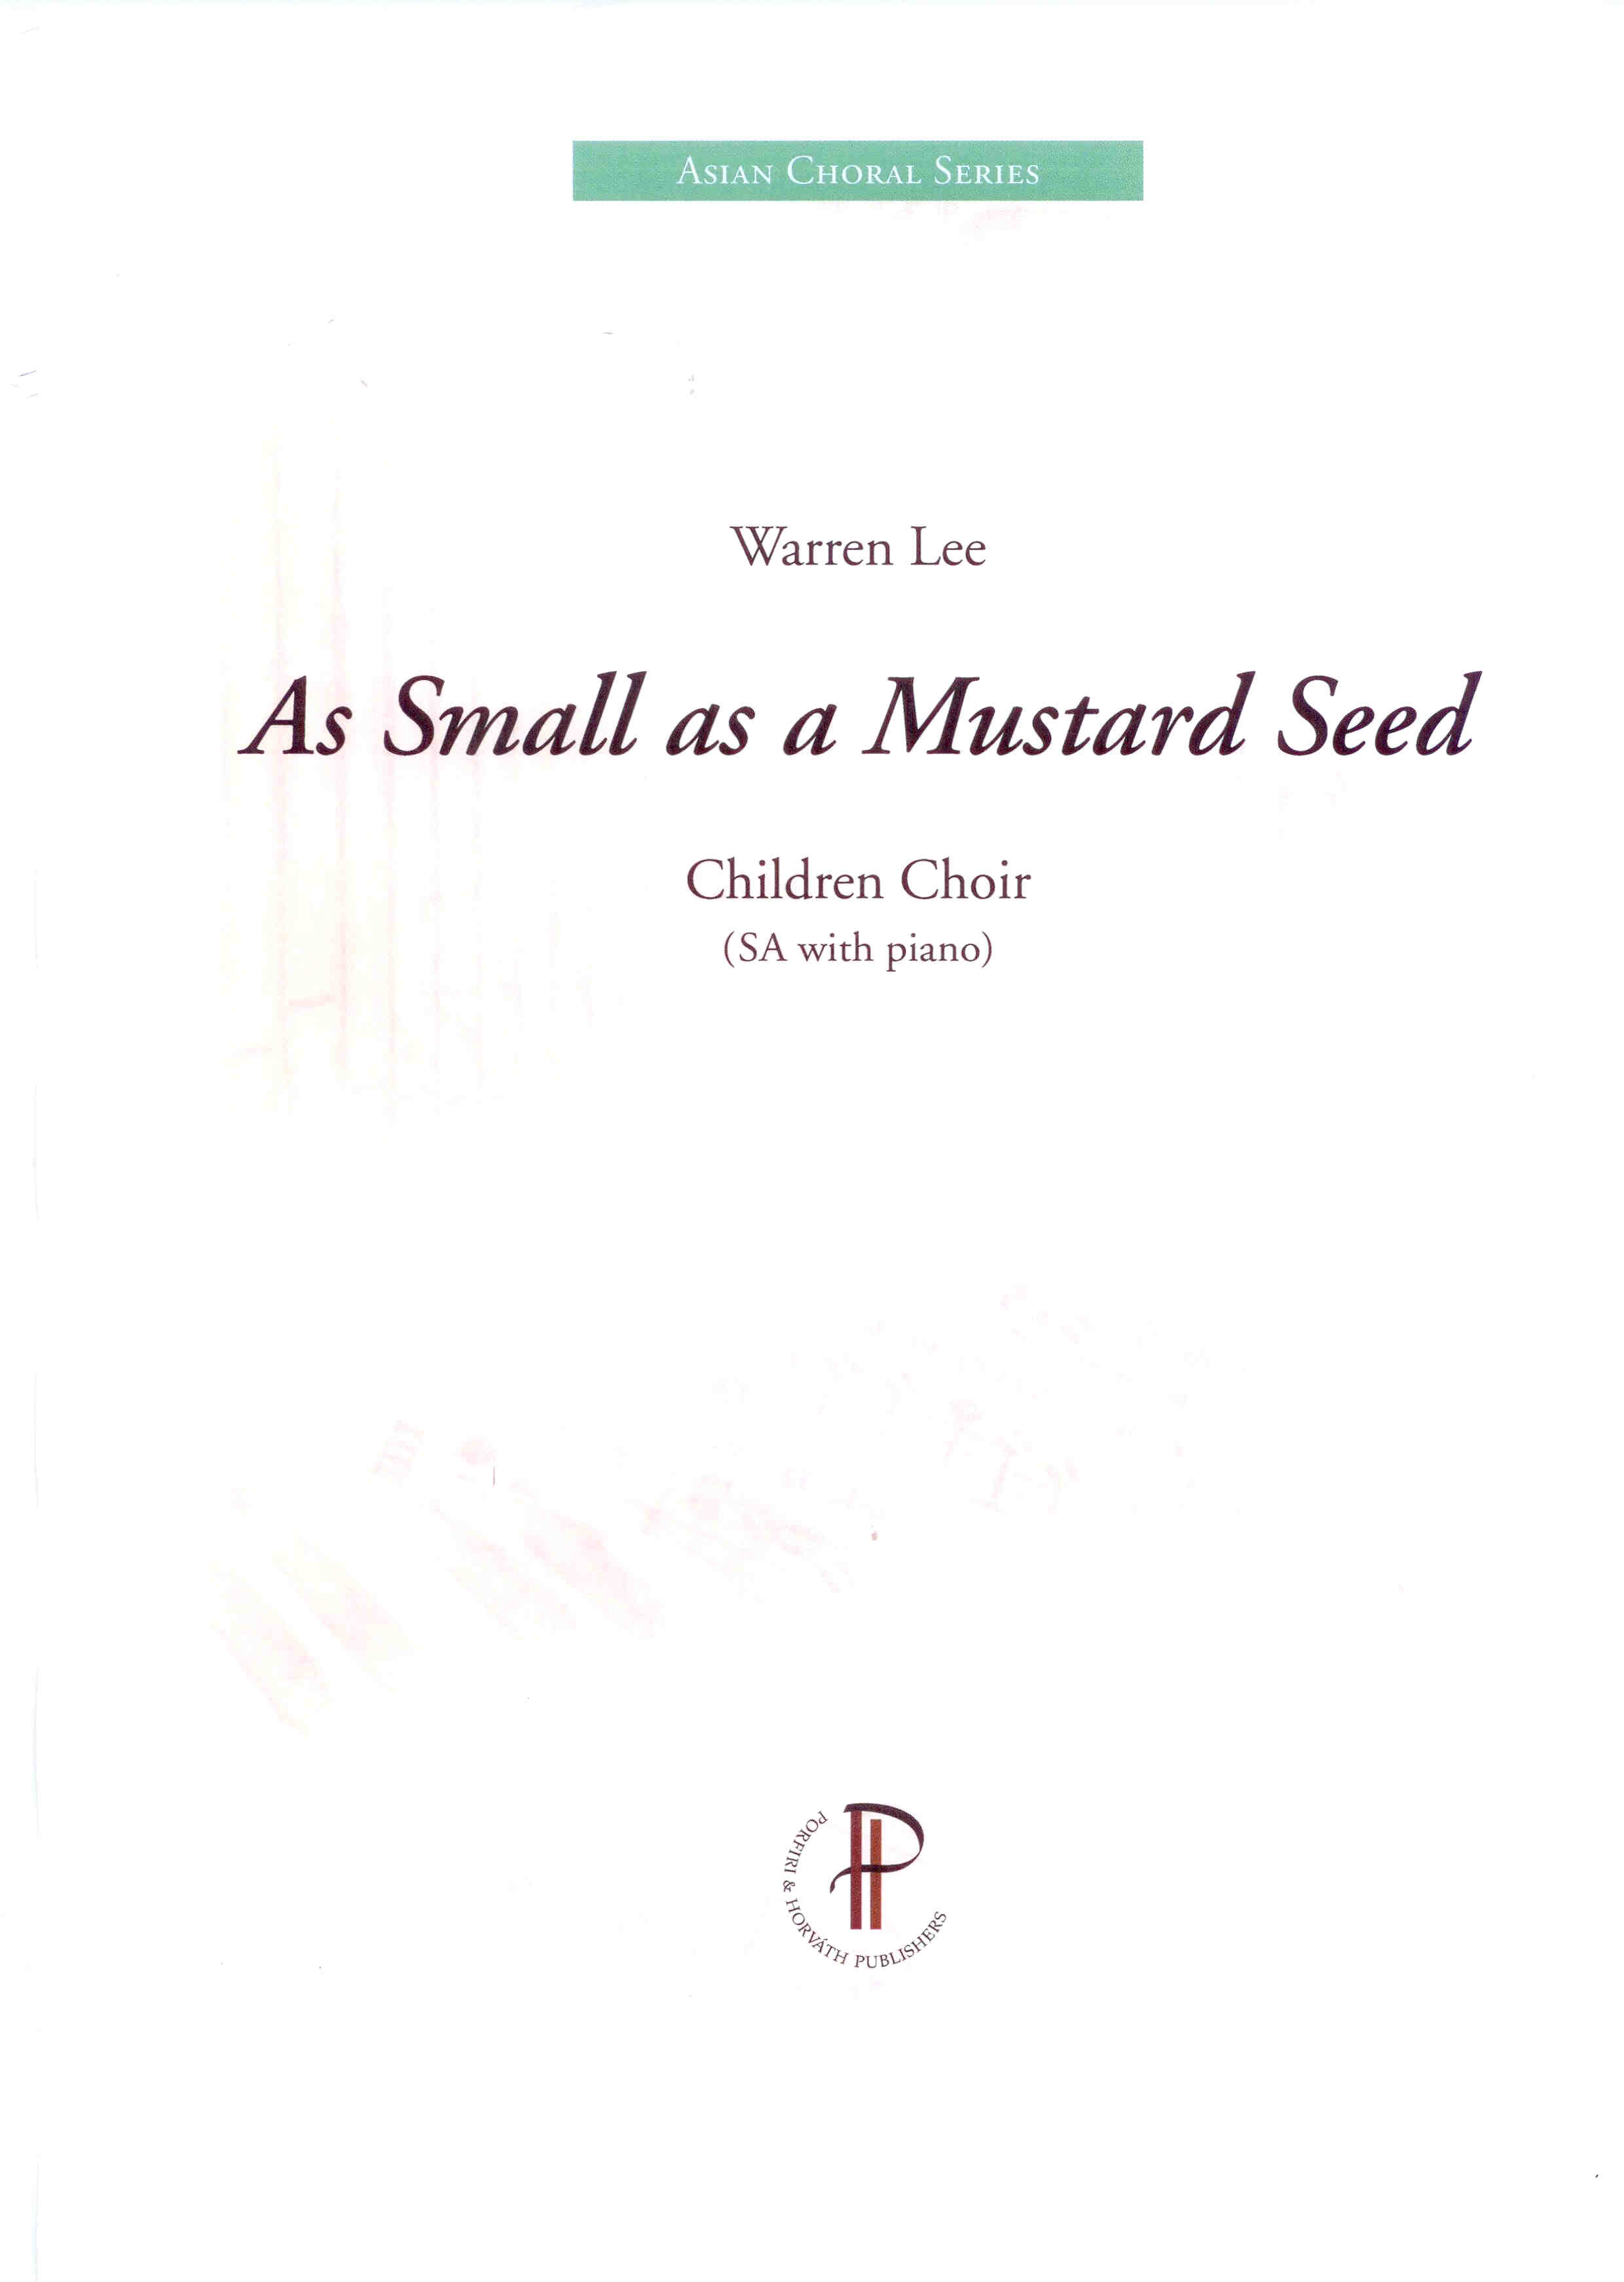 As small as a Mustard Seed - Show sample score